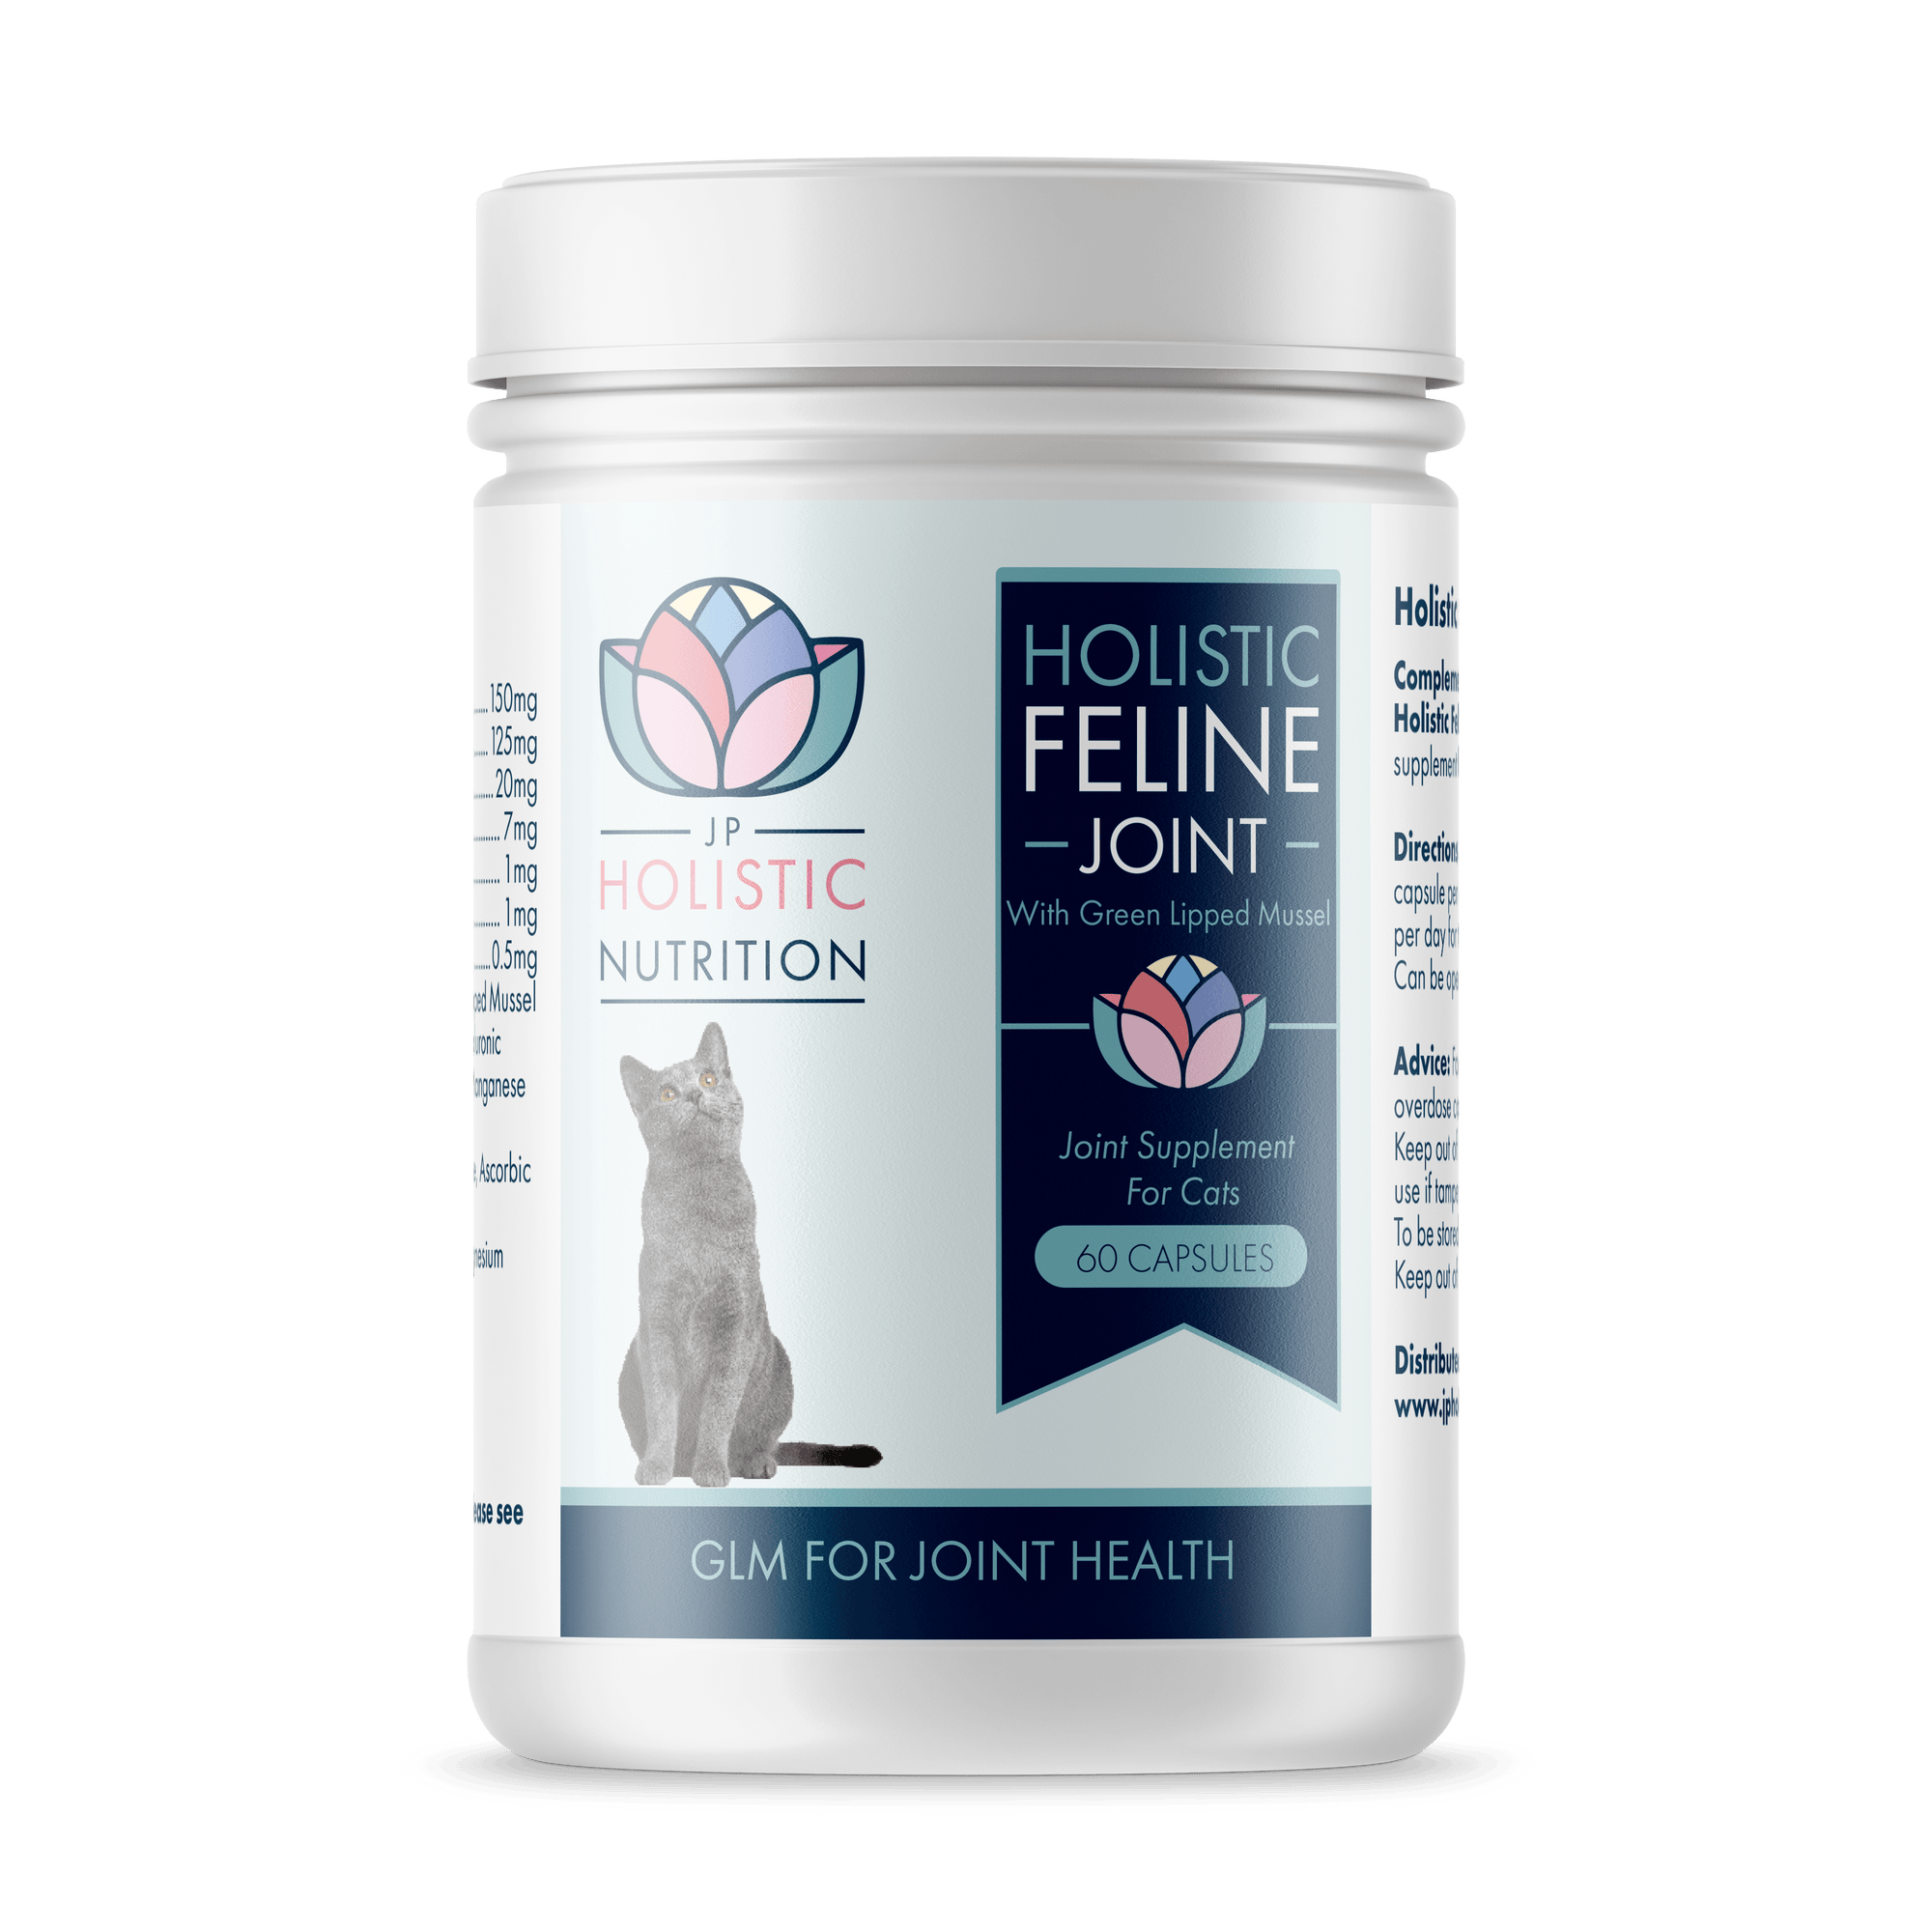 Holistic Feline Joint is a natural joint supplement for cats